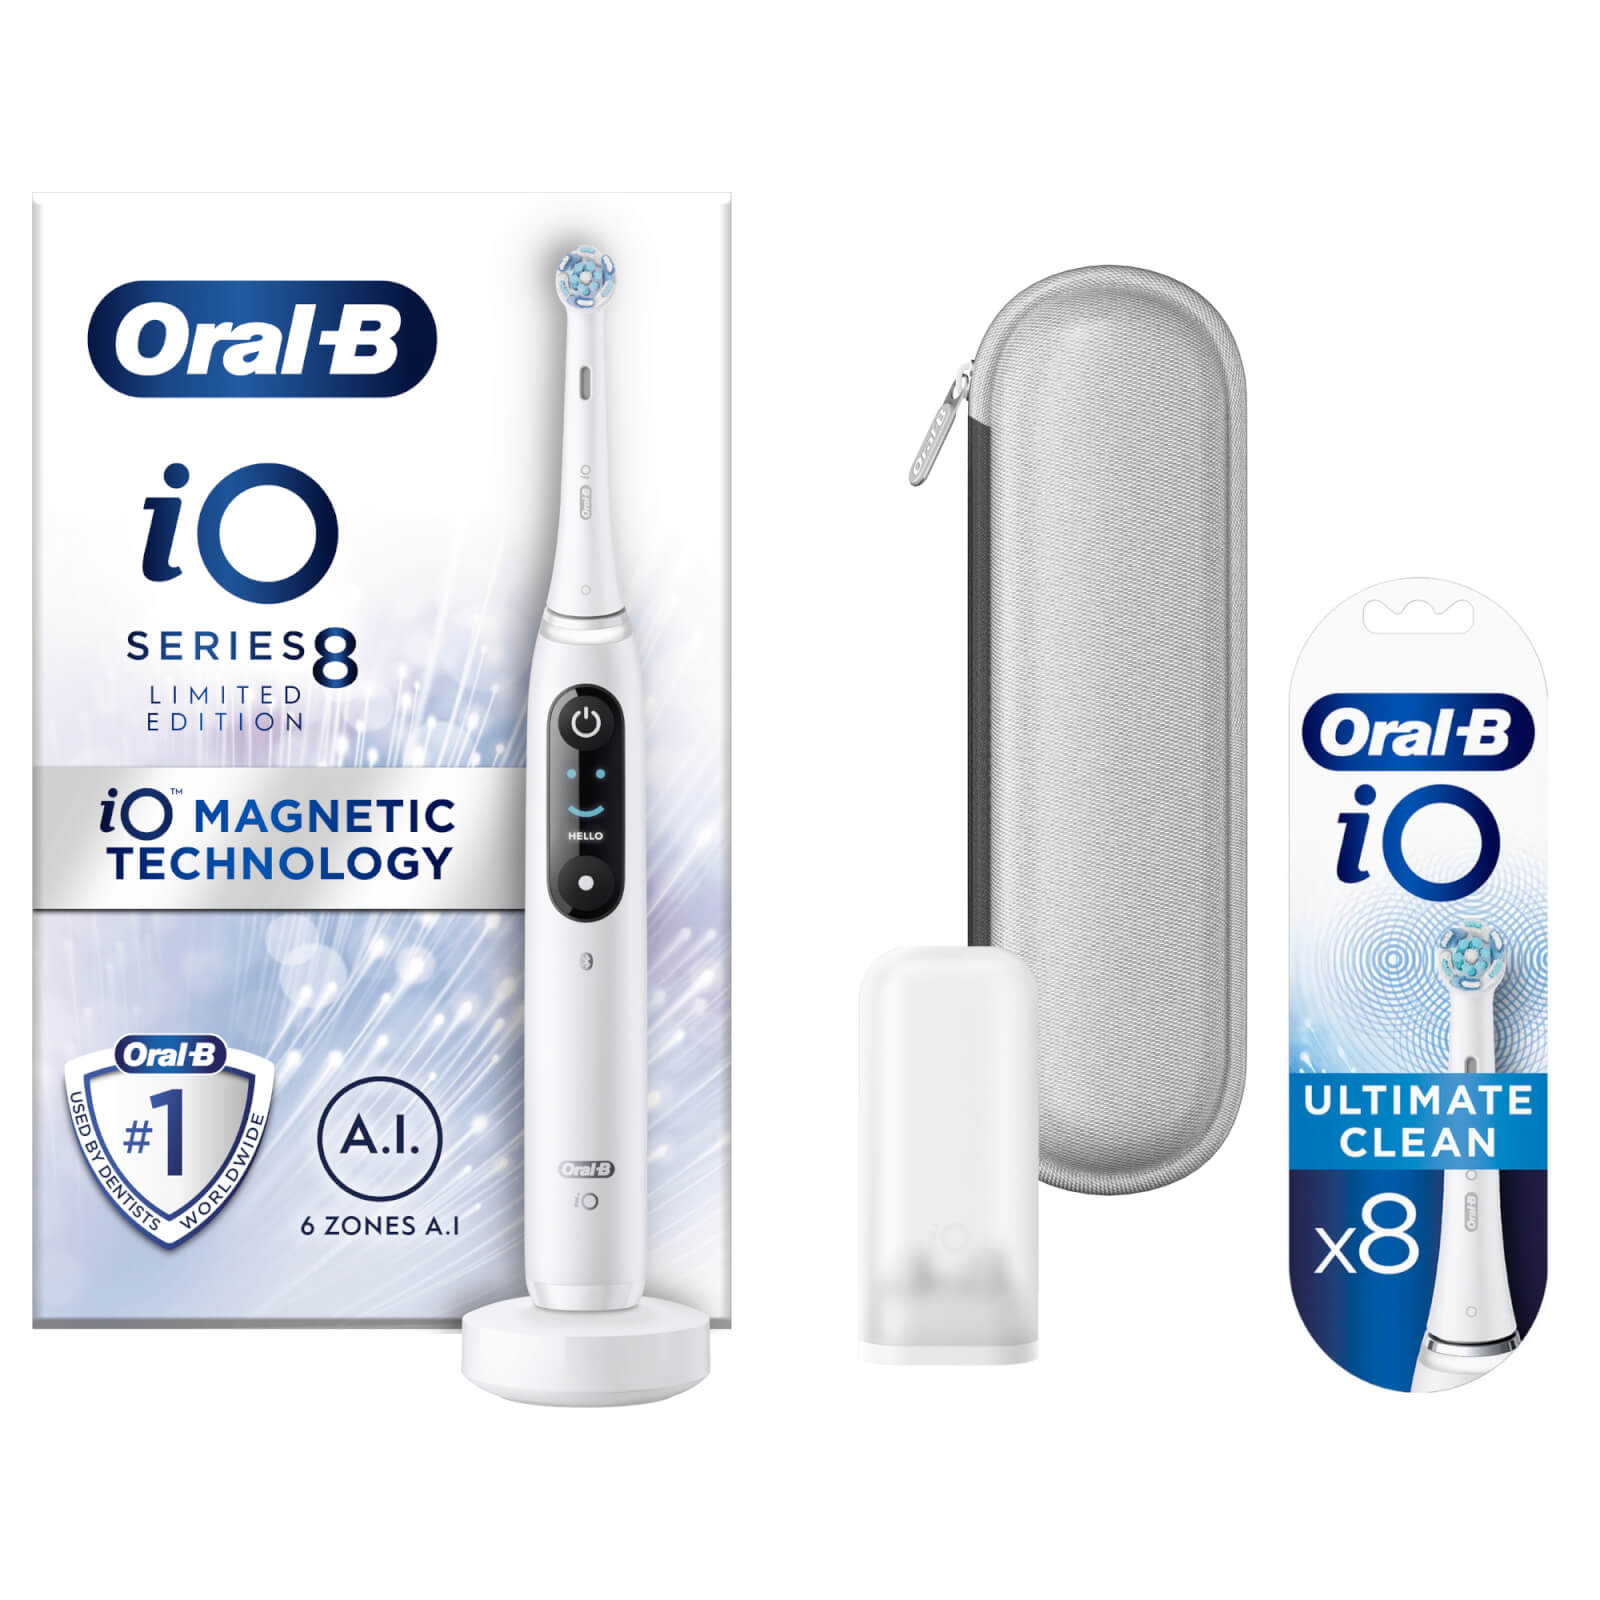 Oral B iO8 White Electric Toothbrush with Zipper Case - Toothbrush + 8 Refills